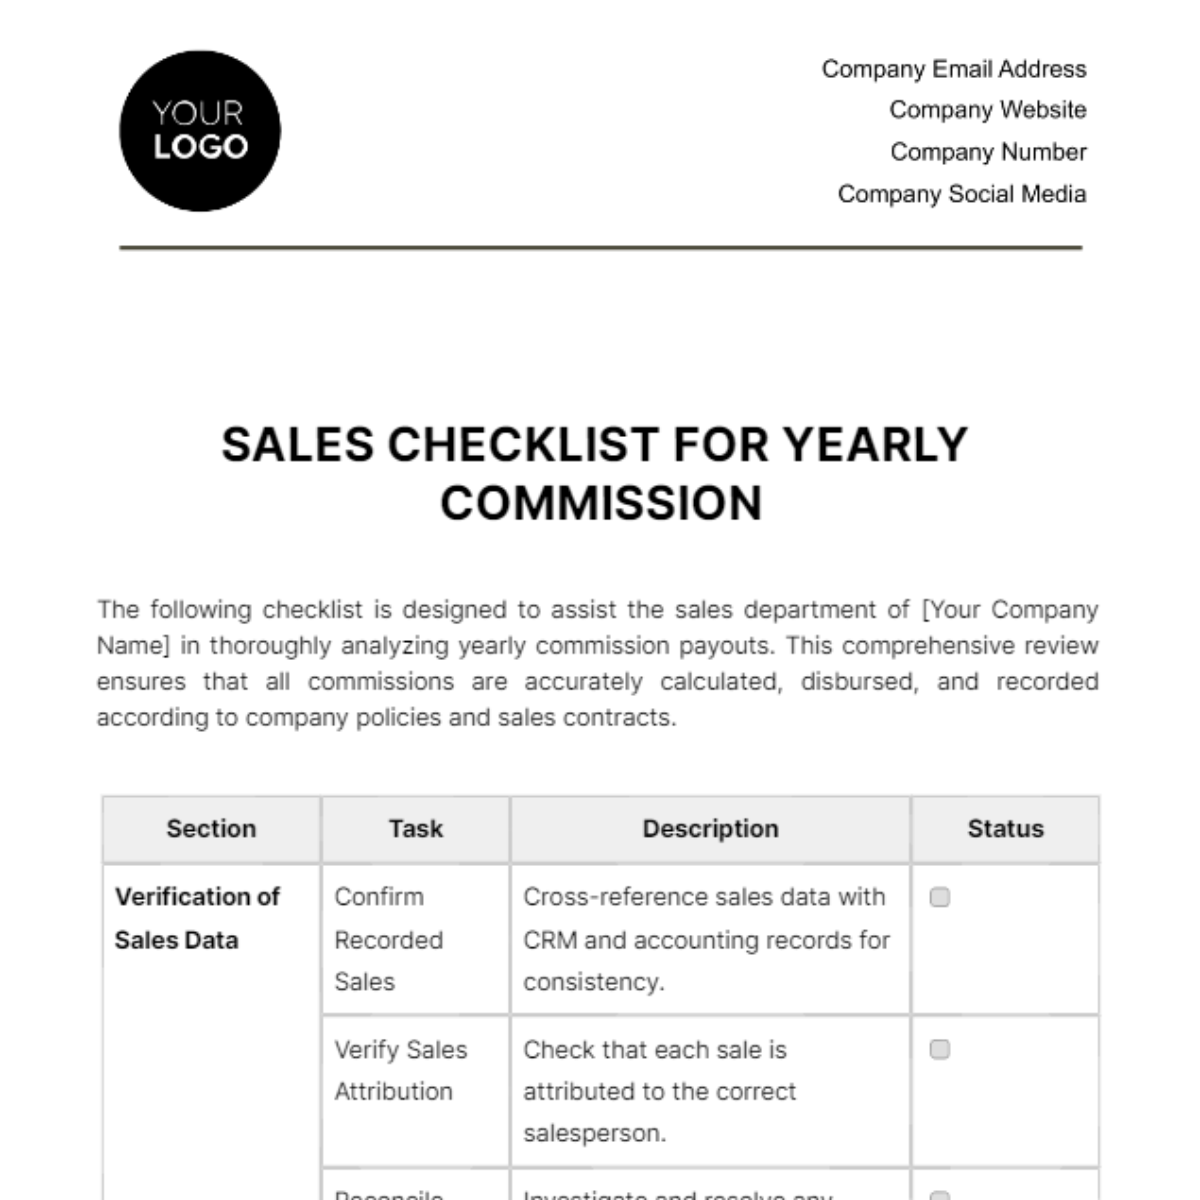 Free Sales Checklist for Yearly Commission Analysis Template